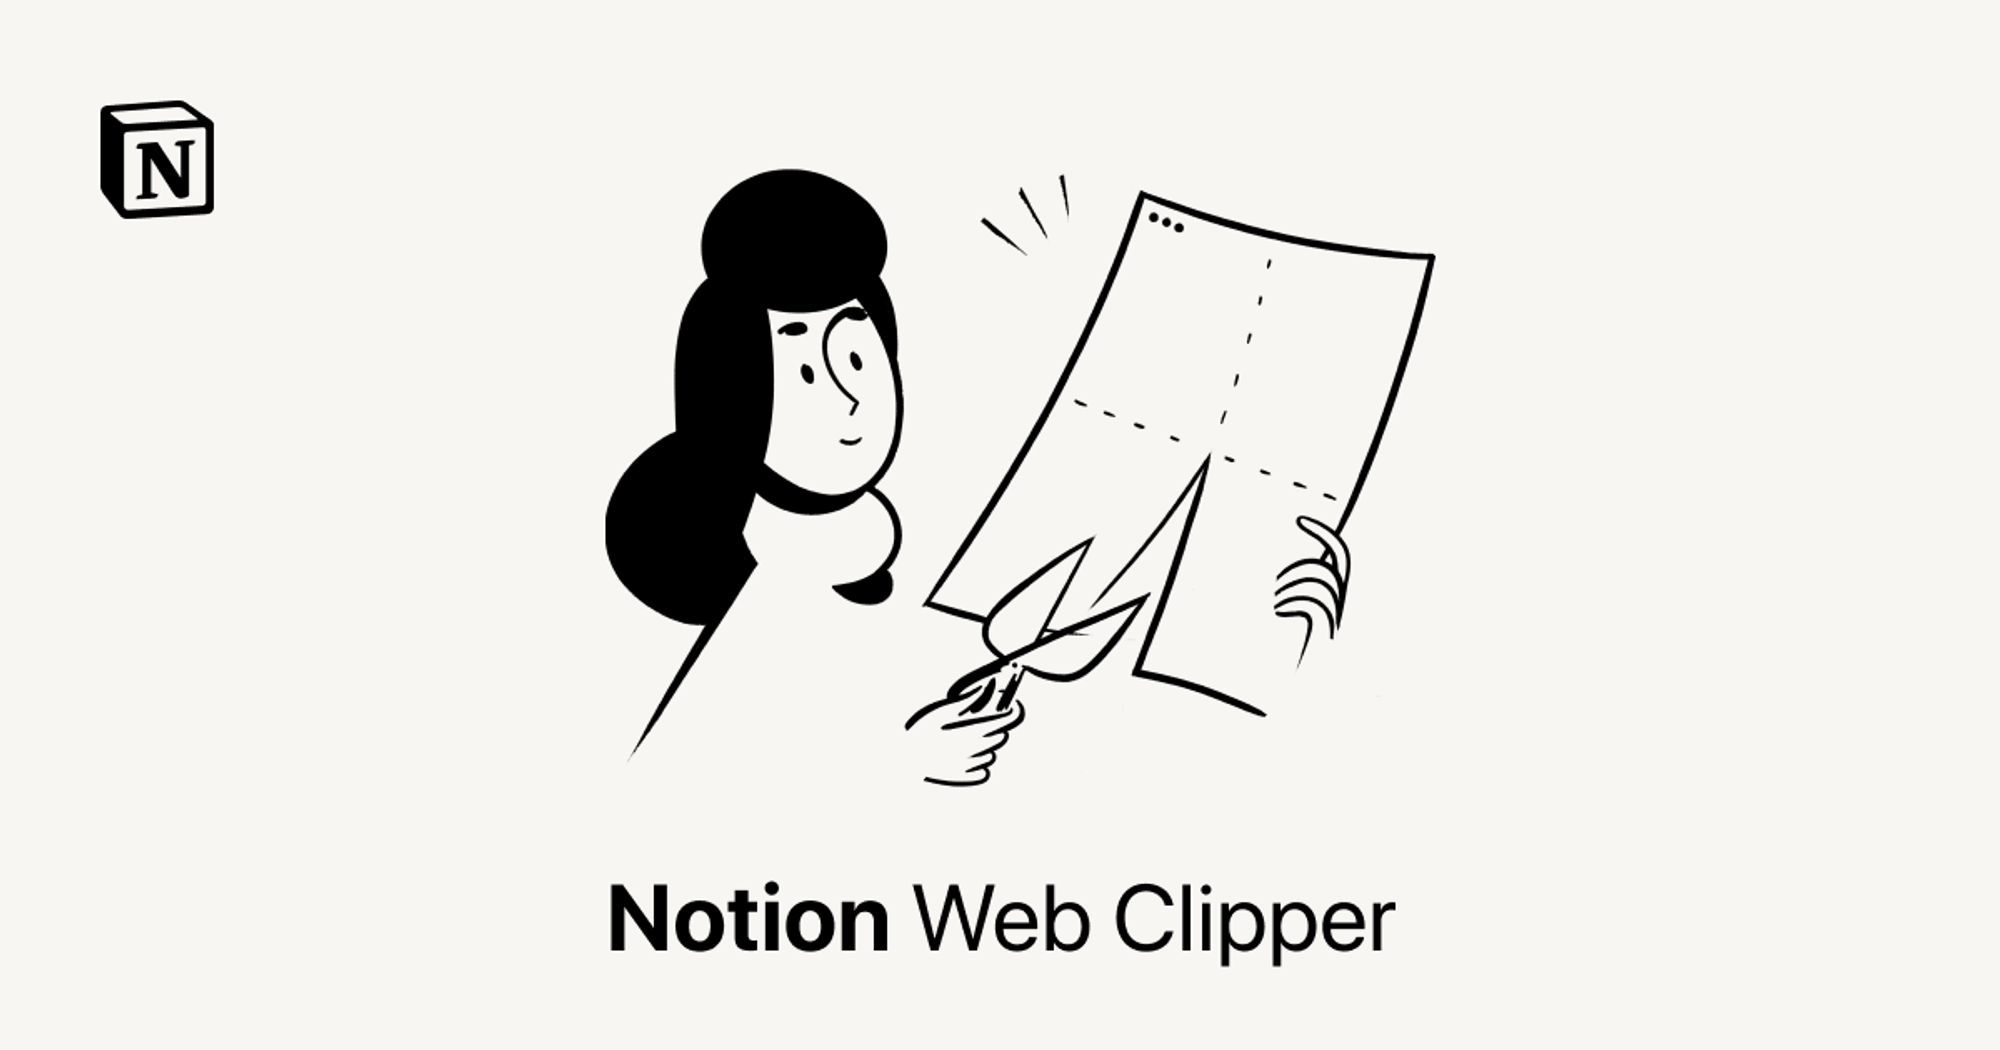 Notion Web Clipper for Chrome, Safari, Firefox, and mobile